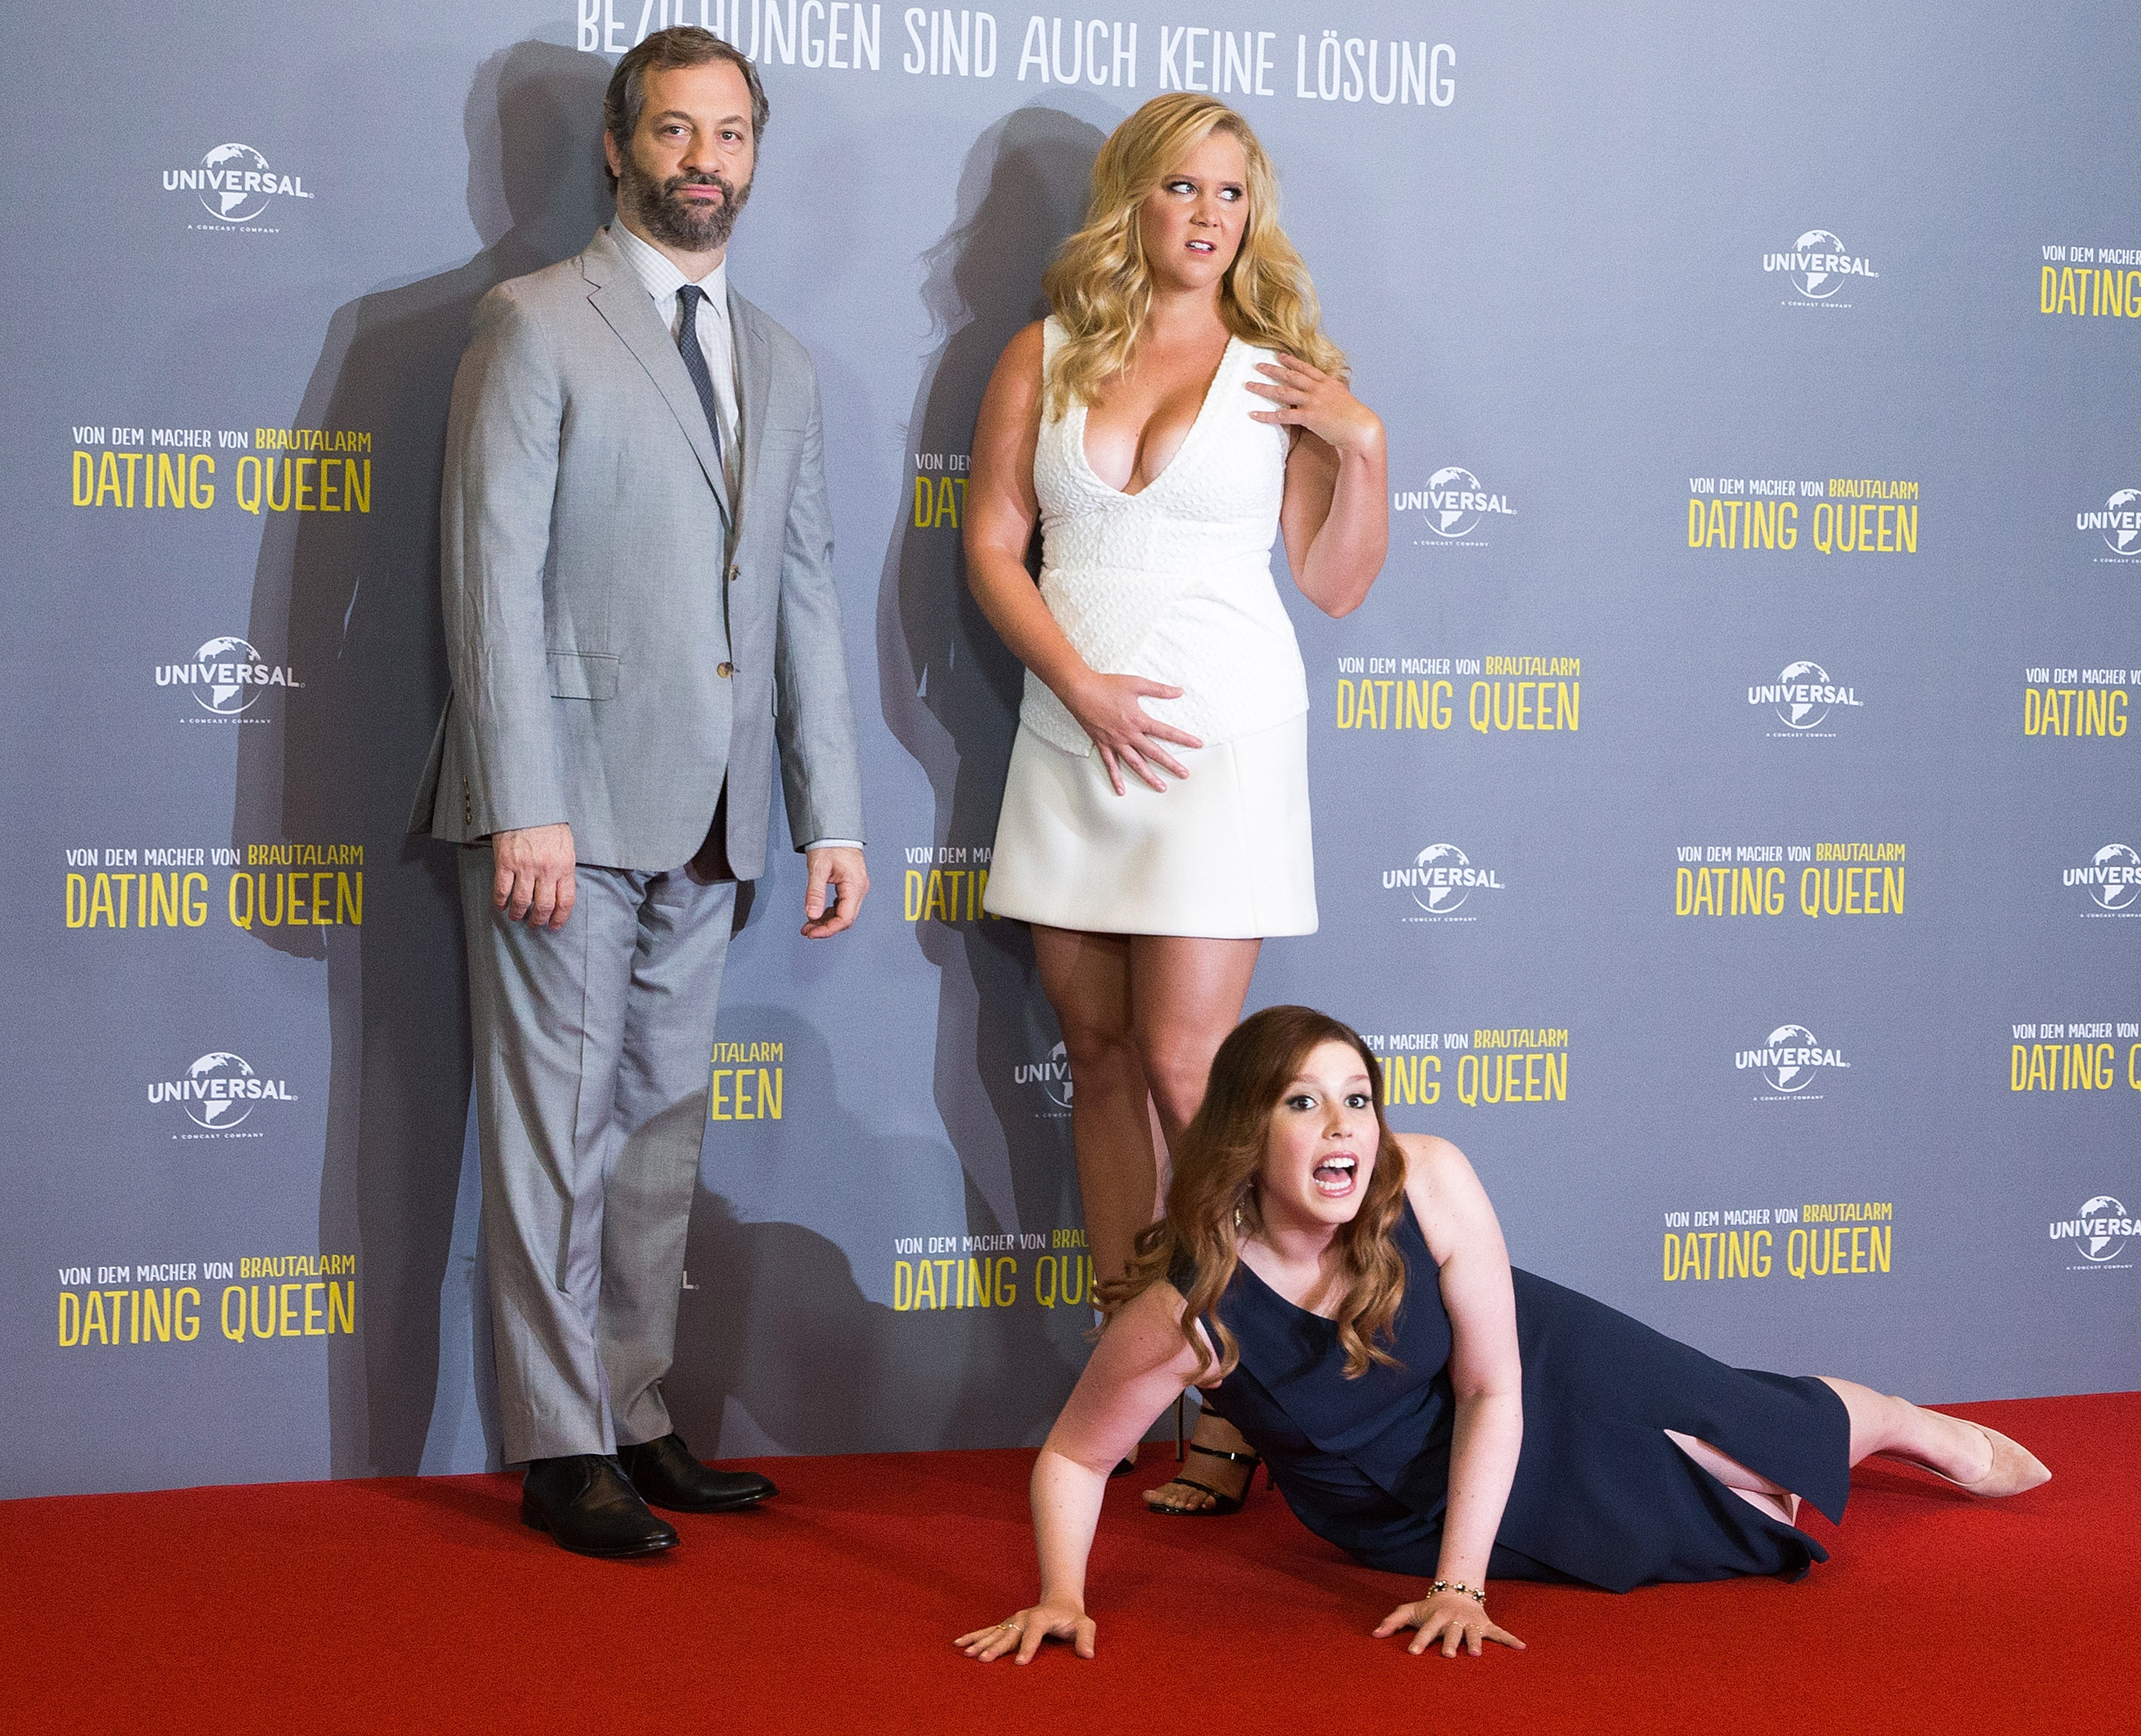 Amy Schumer; Vanessa Bayer and Judd Apatow attend a photo call for the film 'Dating Queen' at Ritz Carlton on August 11, 2015 in Berlin, Germany. (Luca Teuchmann&mdash;Getty Images)